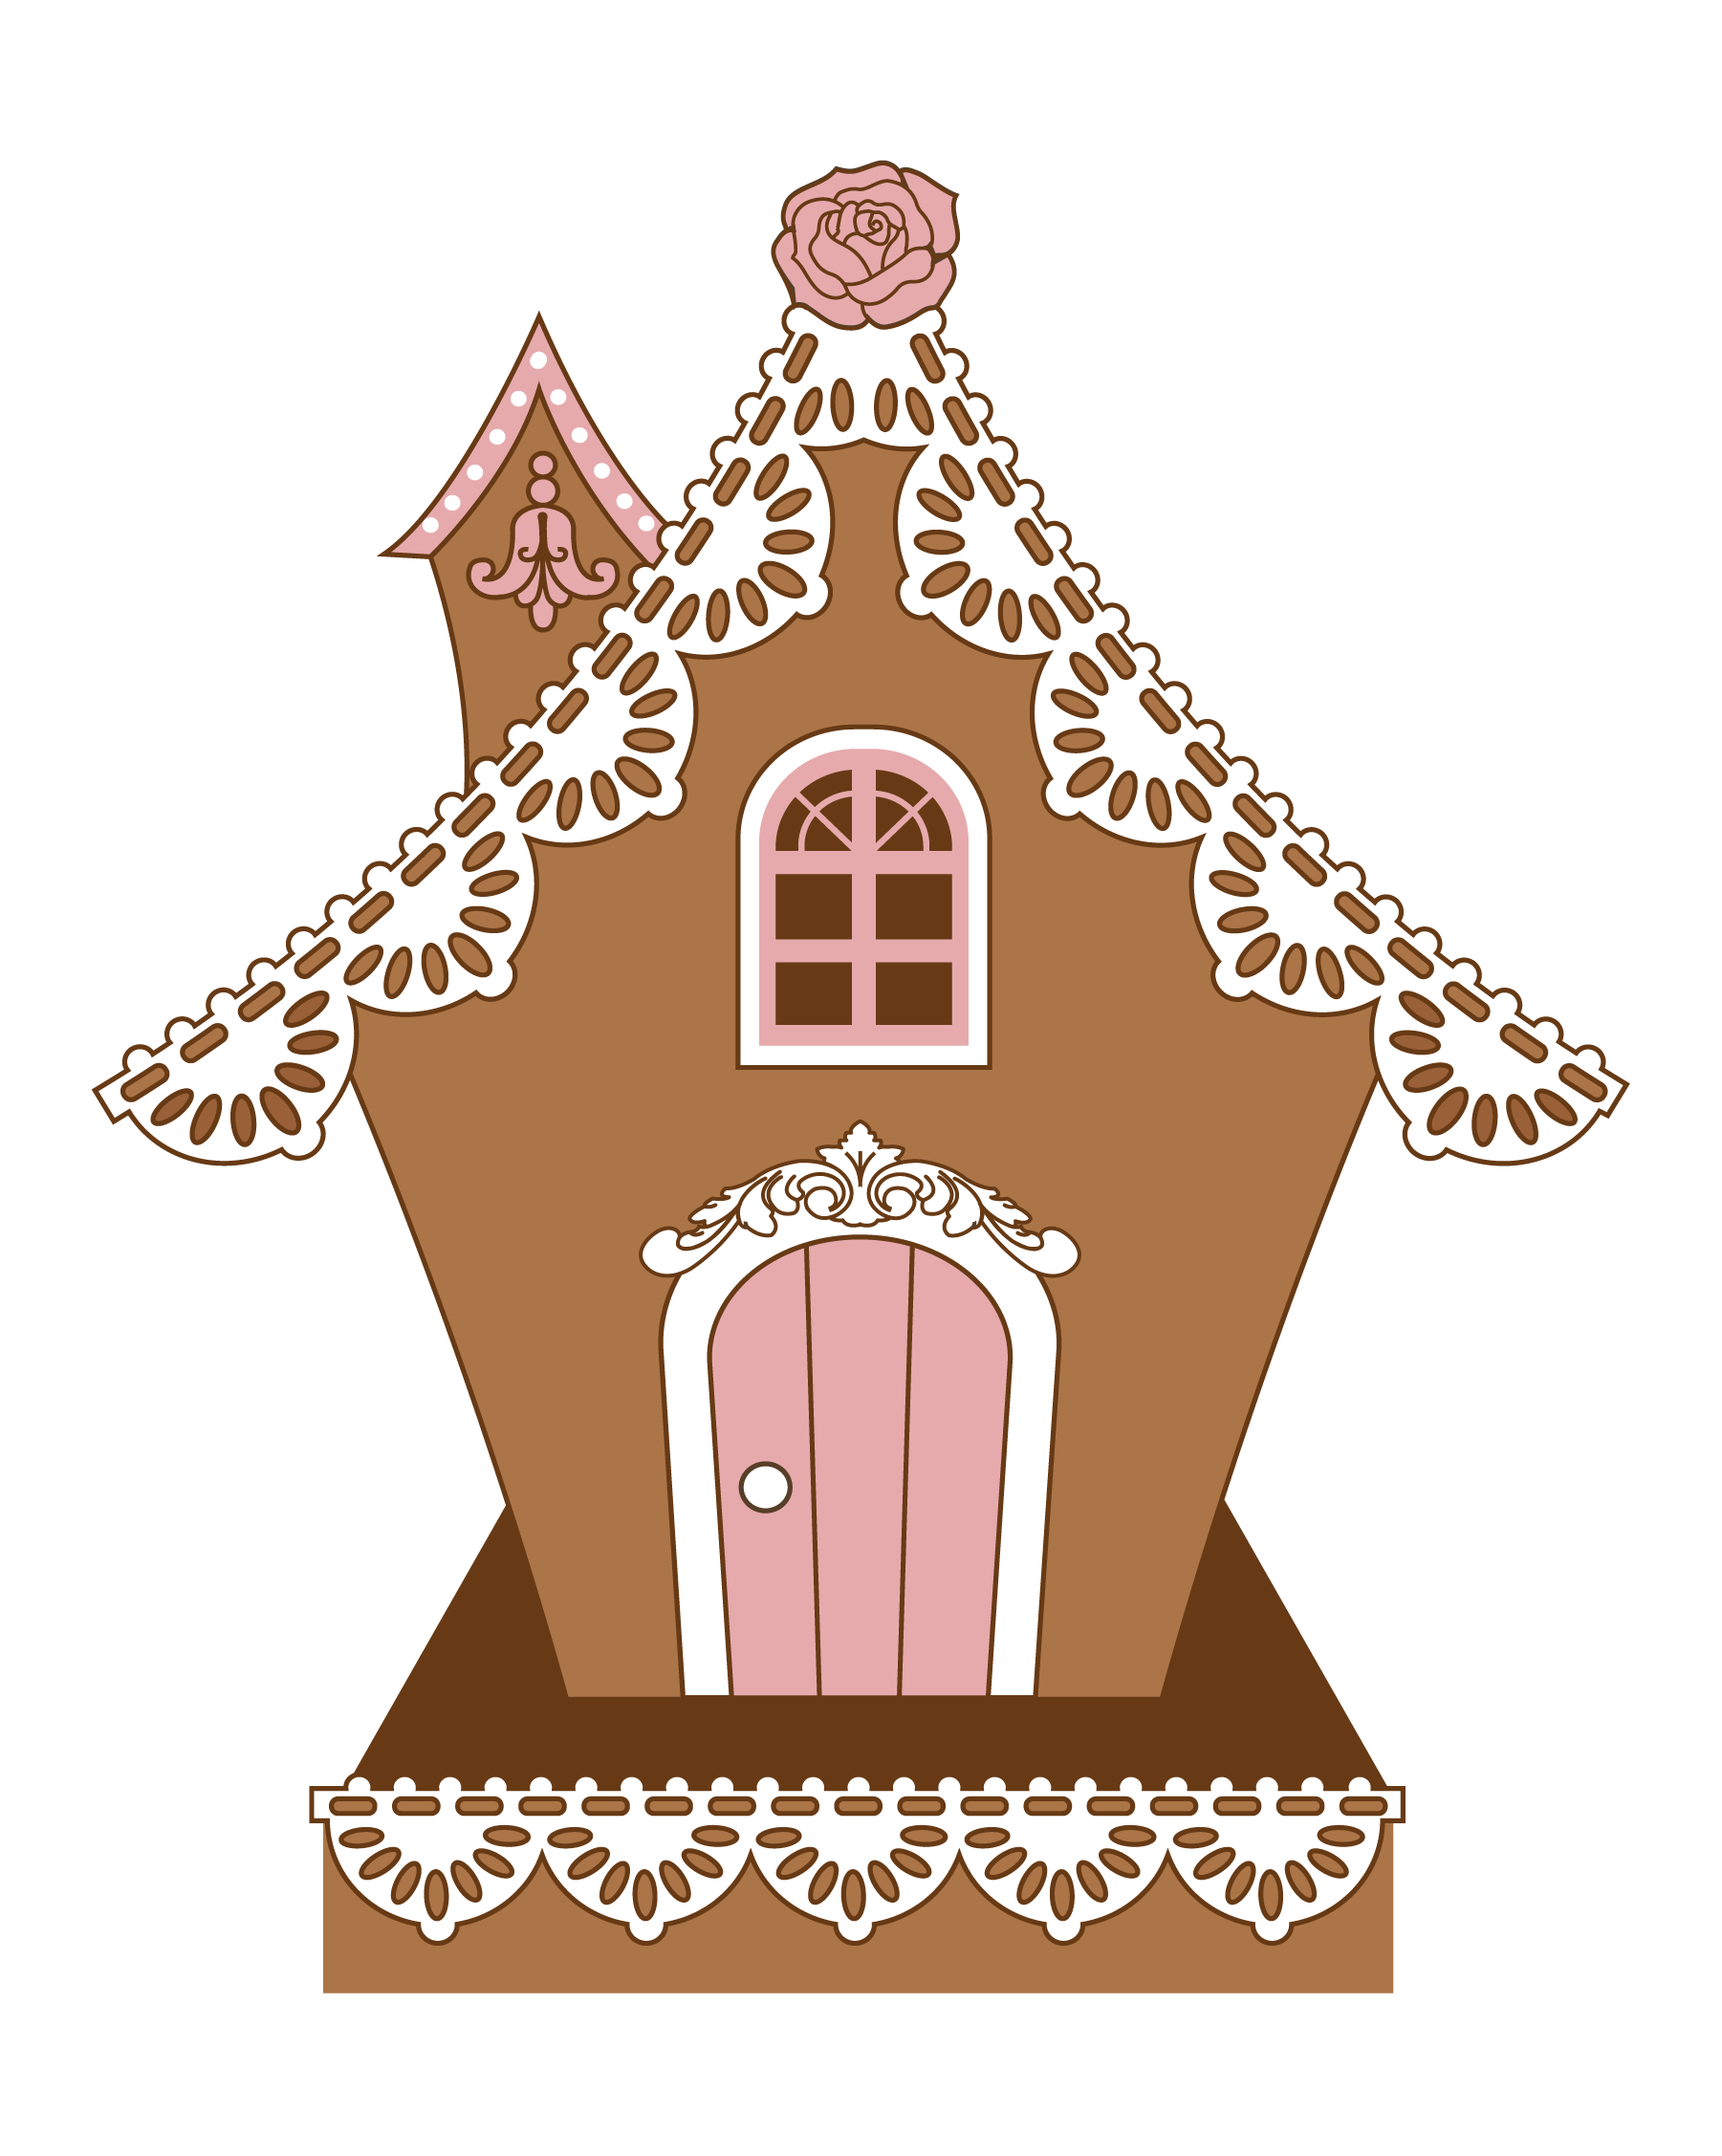 Gingerneers logo. A small brown, white and pink gingerbread house.